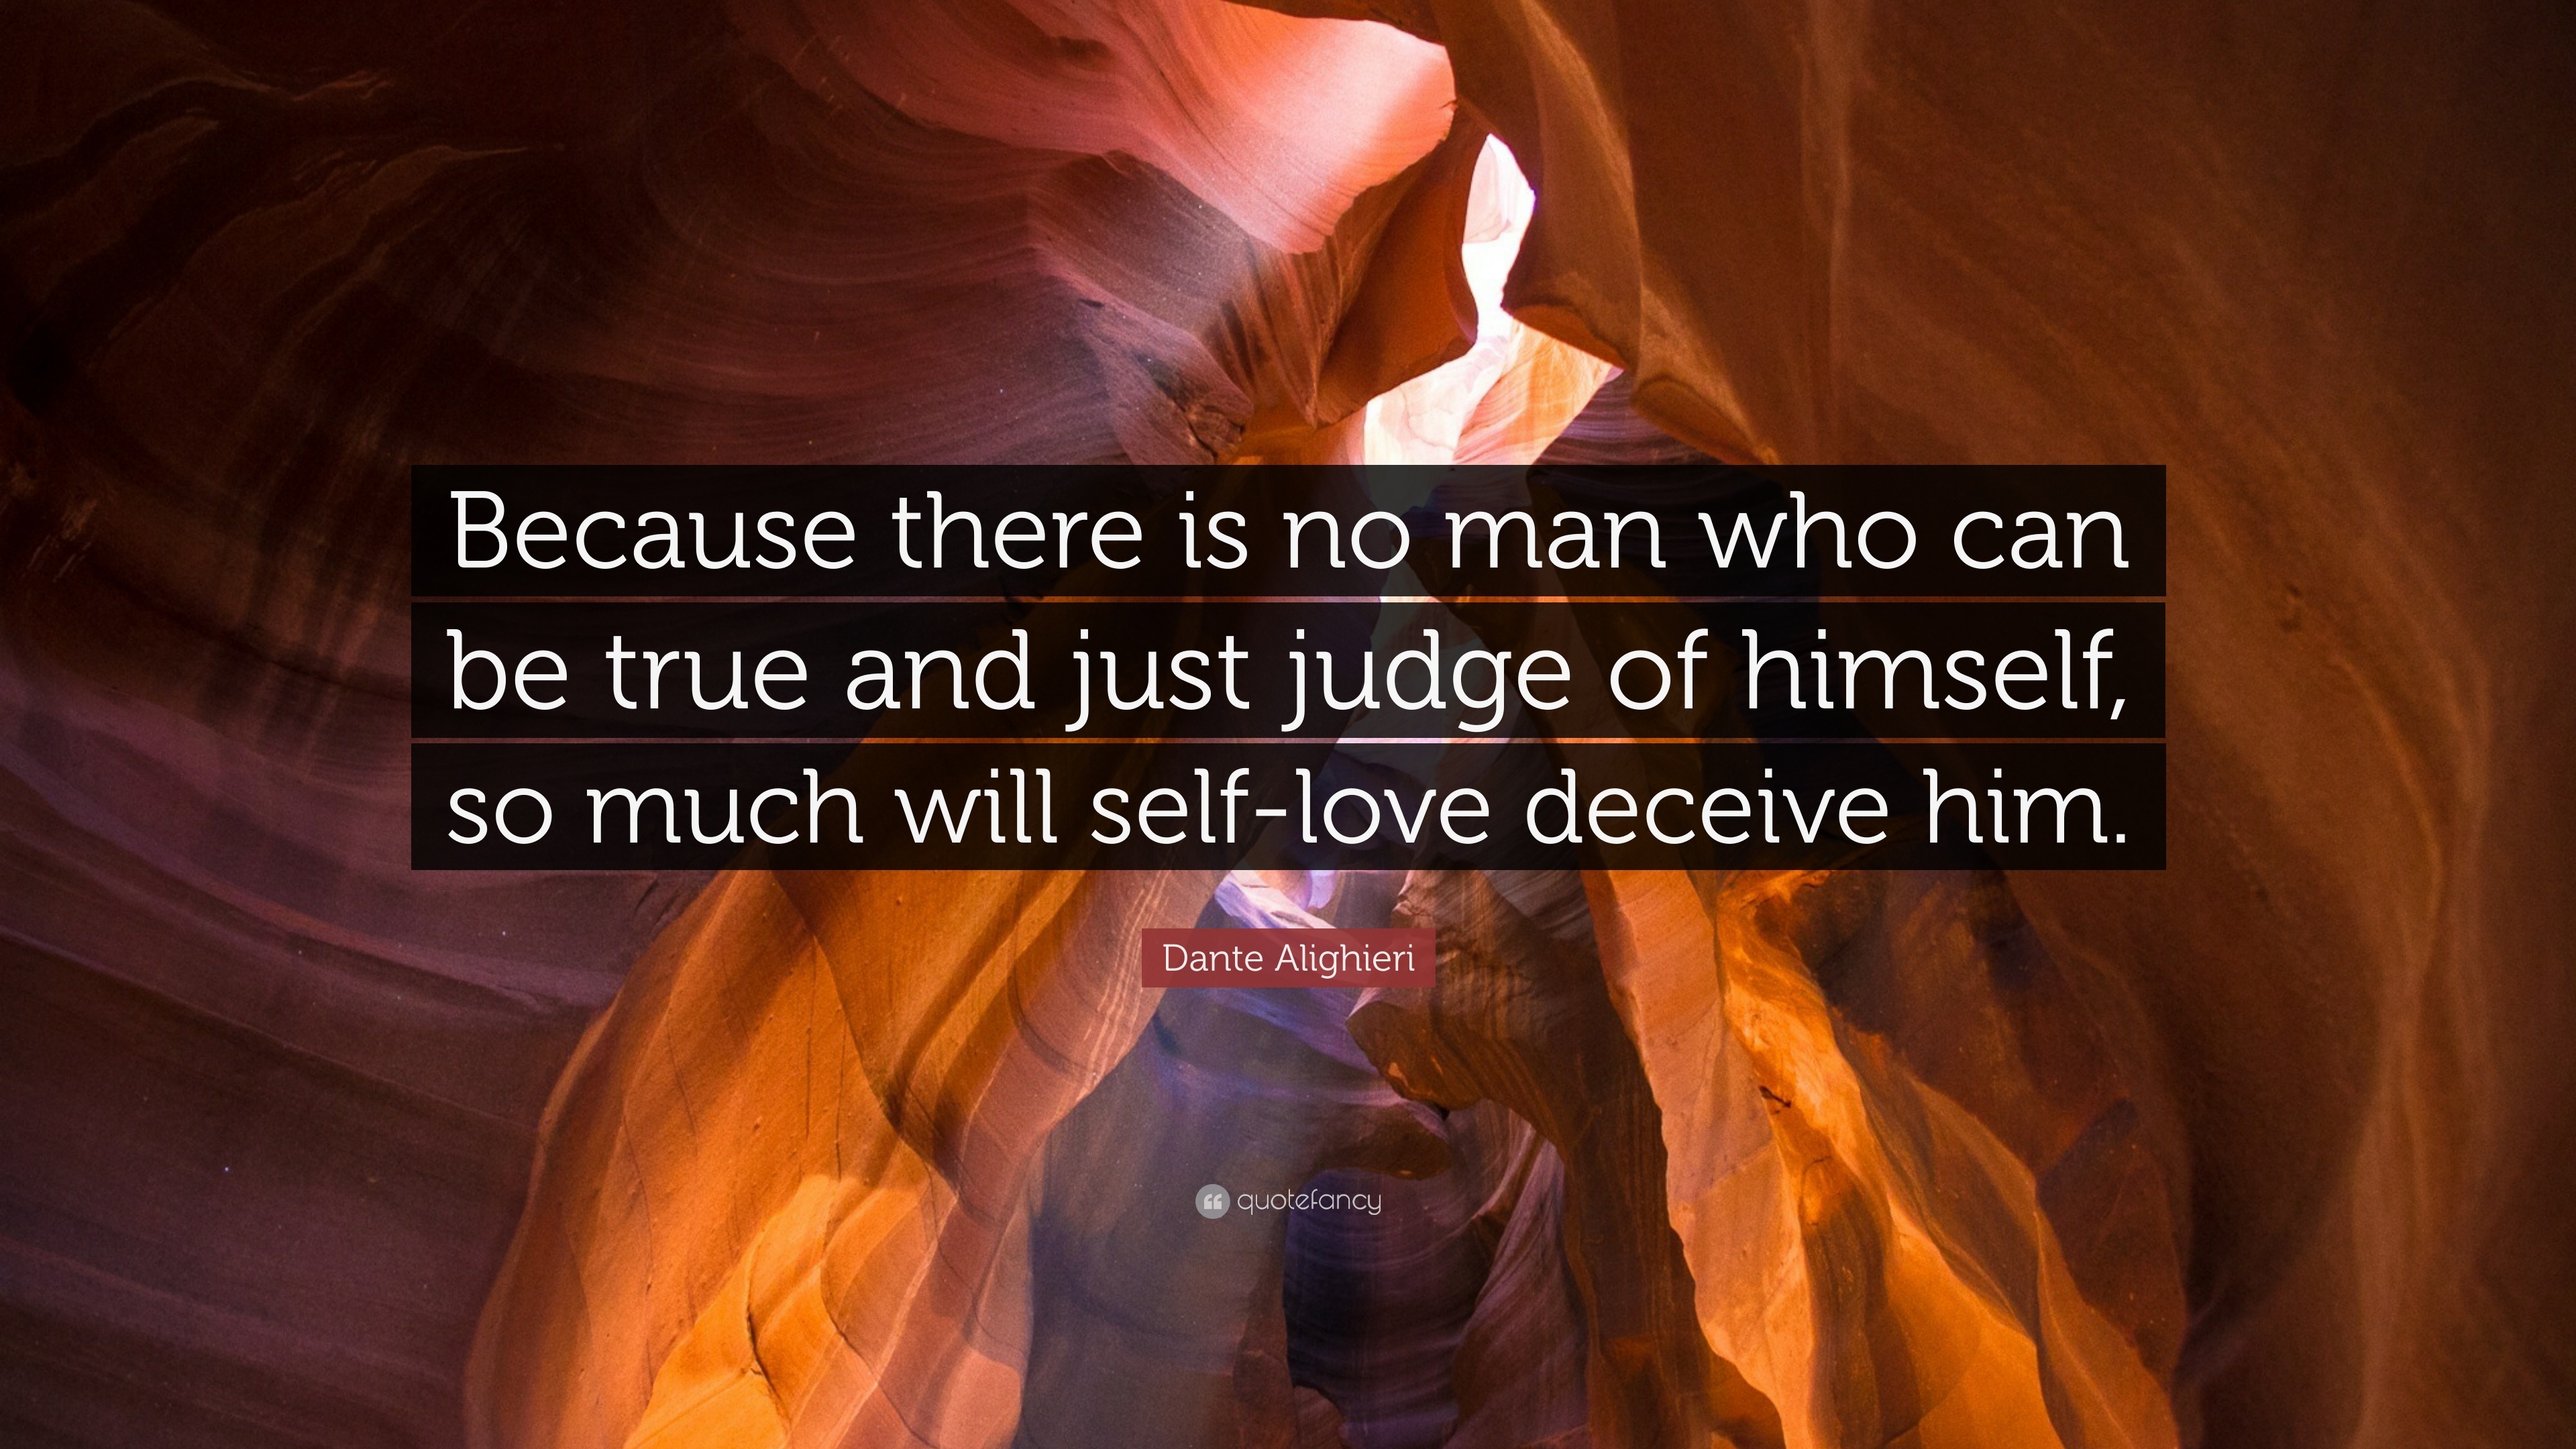 Dante Alighieri Quote: “Because there is no man who can be true and ...